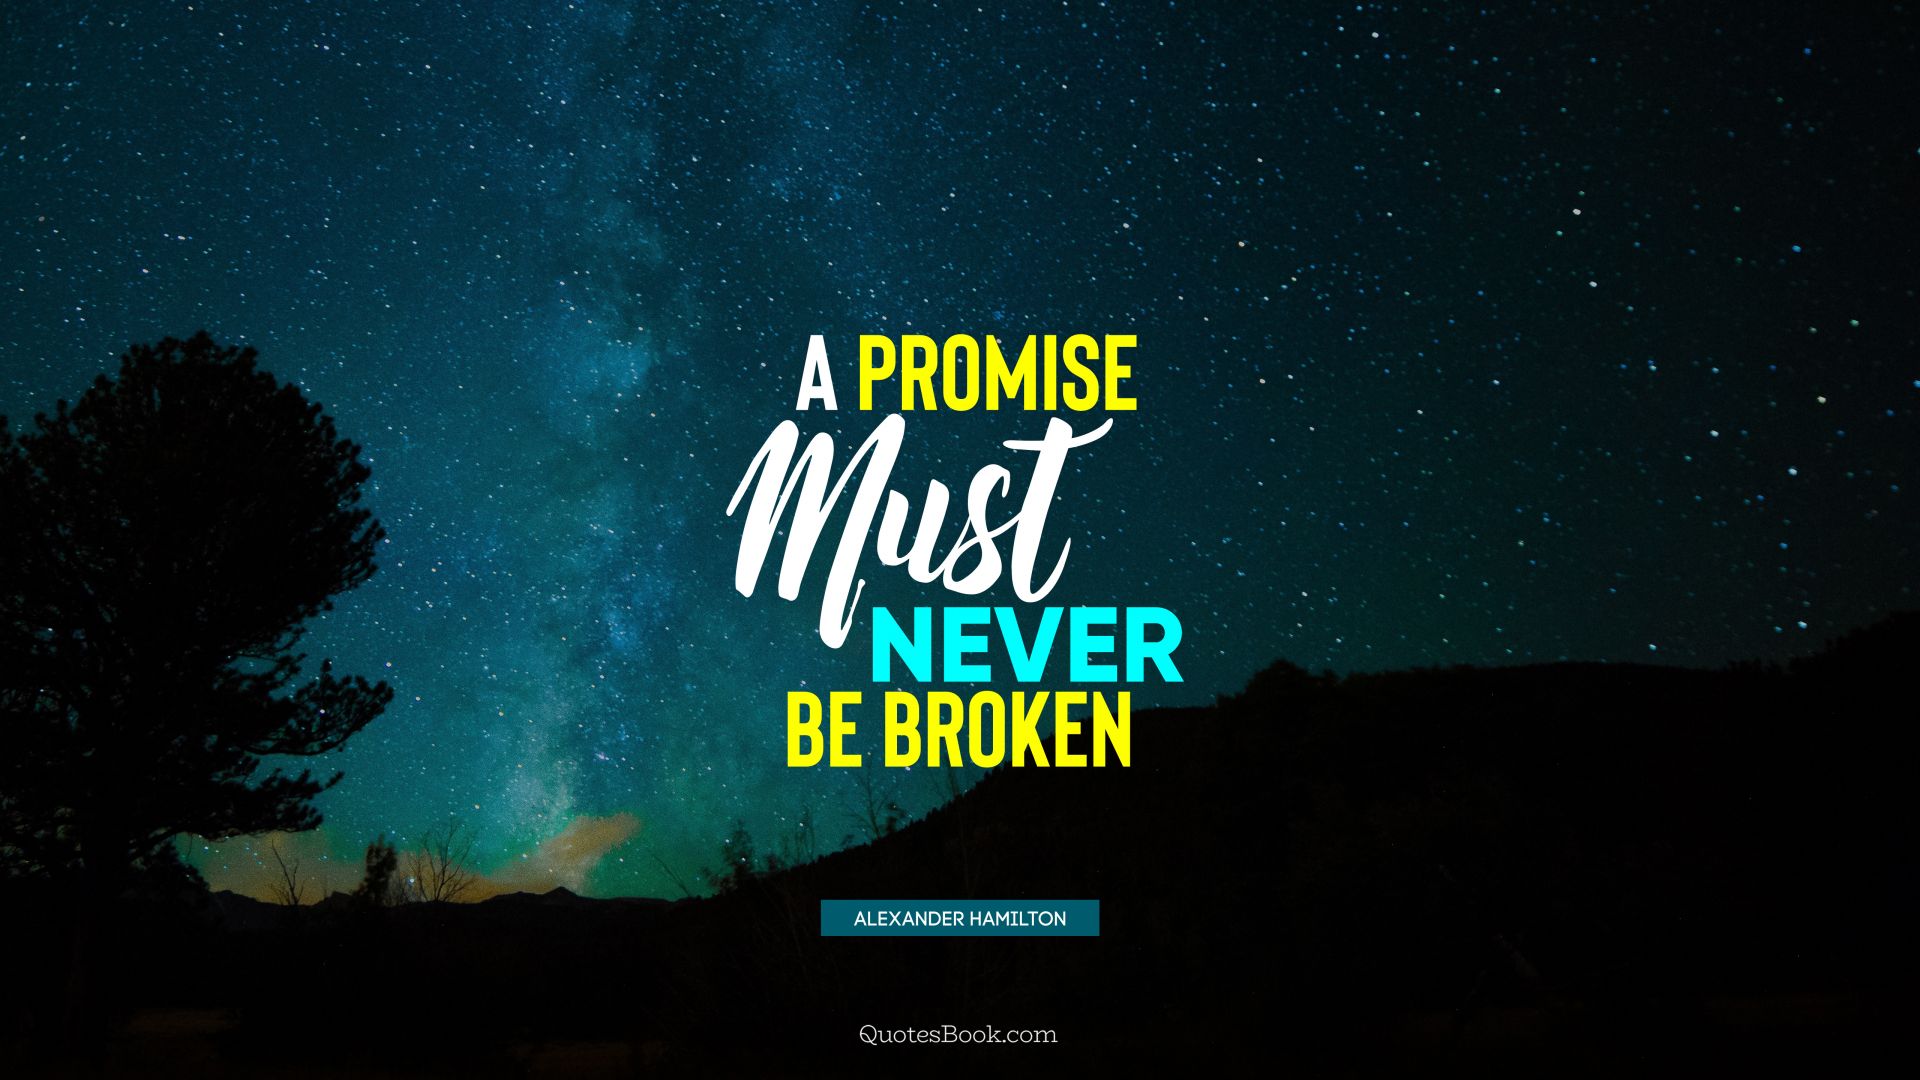 A promise must never be broken. - Quote by Alexander Hamilton